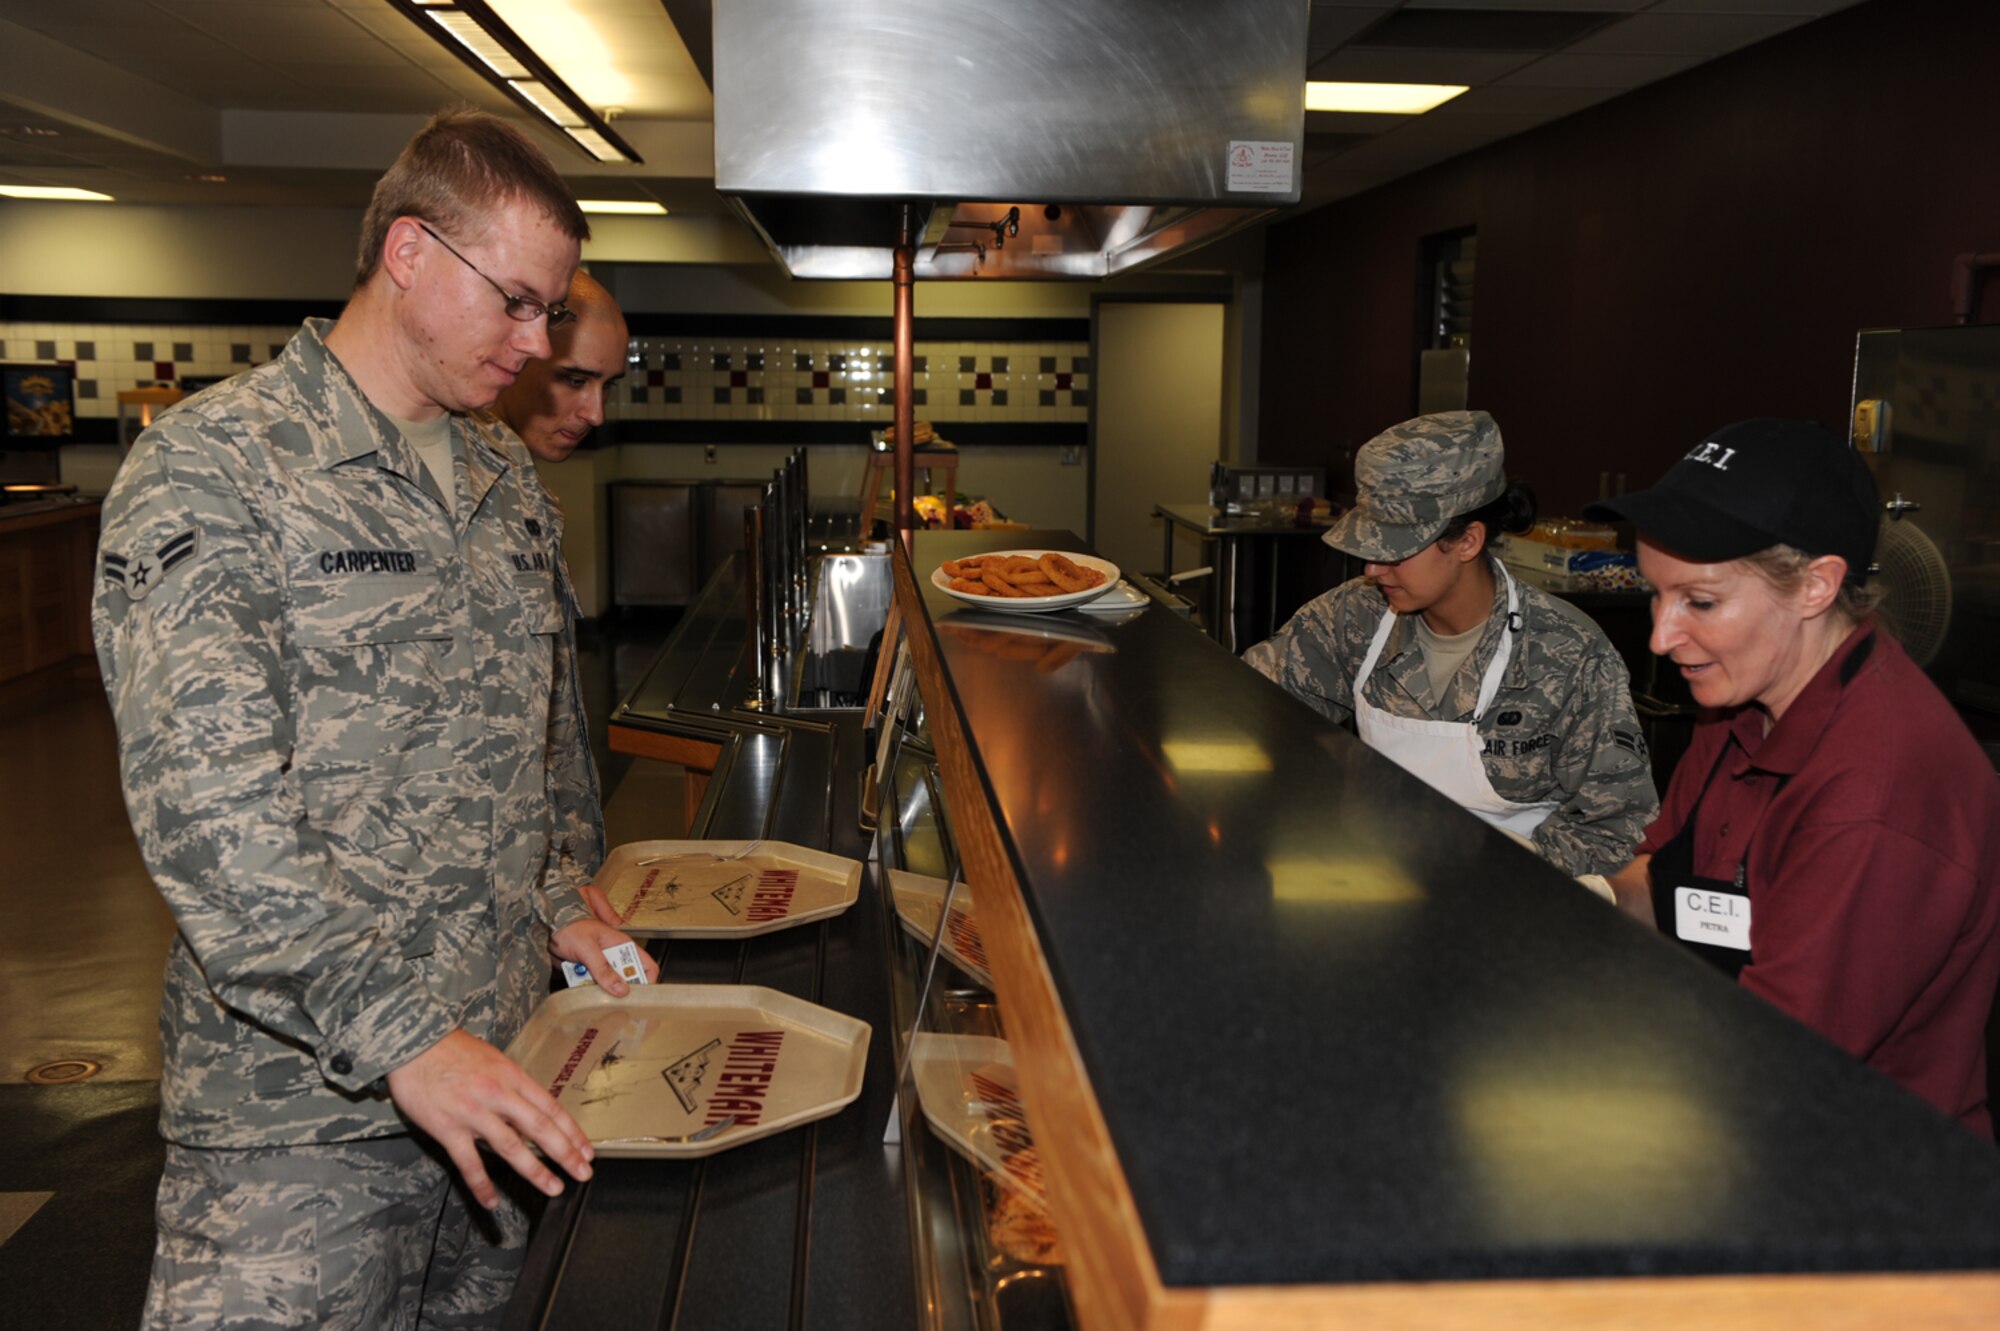 WHITEMAN AIR FORCE BASE, Mo. - Customers stand in line as they decide what they would like to eat from the Ozark Inn. The Ozark Inn has won the John L. Hennessy award for best in food service three consecutive years. (U.S. Air Force Photo/ Airman 1st Class Carlin Leslie)